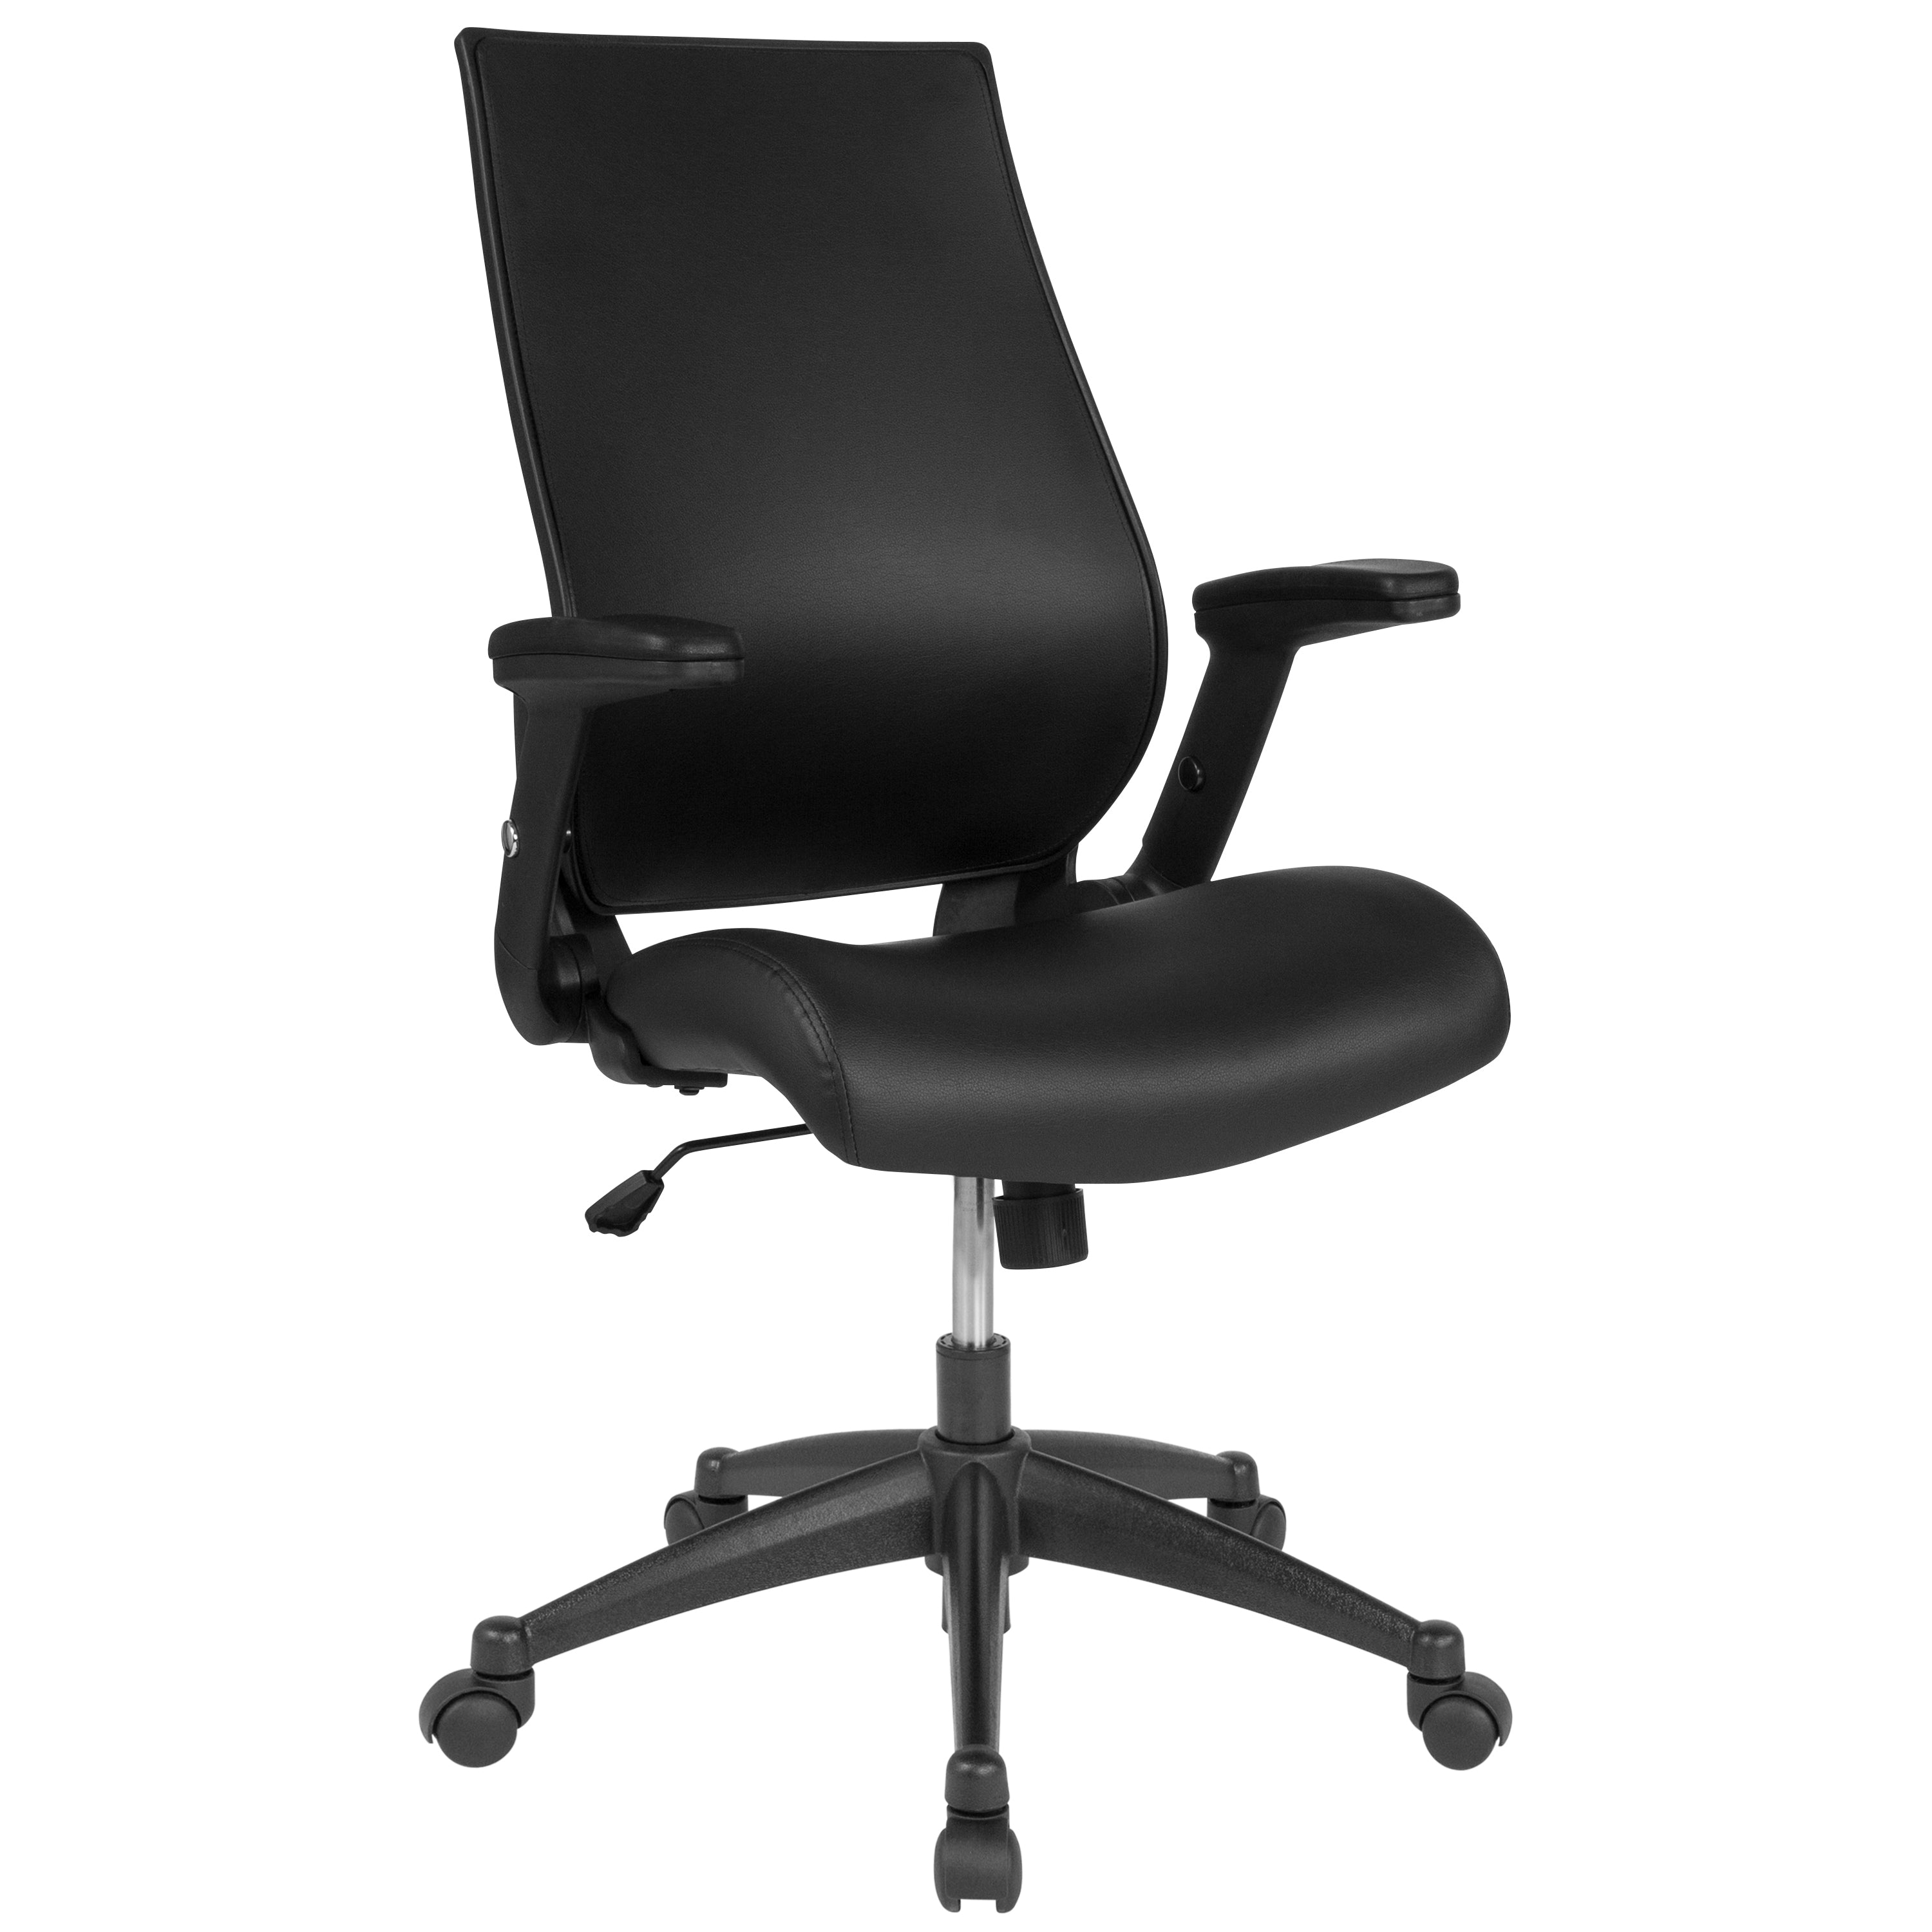 High Back LeatherSoft Executive Swivel Office Chair with Molded Foam Seat and Adjustable Arms-Executive Office Chair-Flash Furniture-Wall2Wall Furnishings